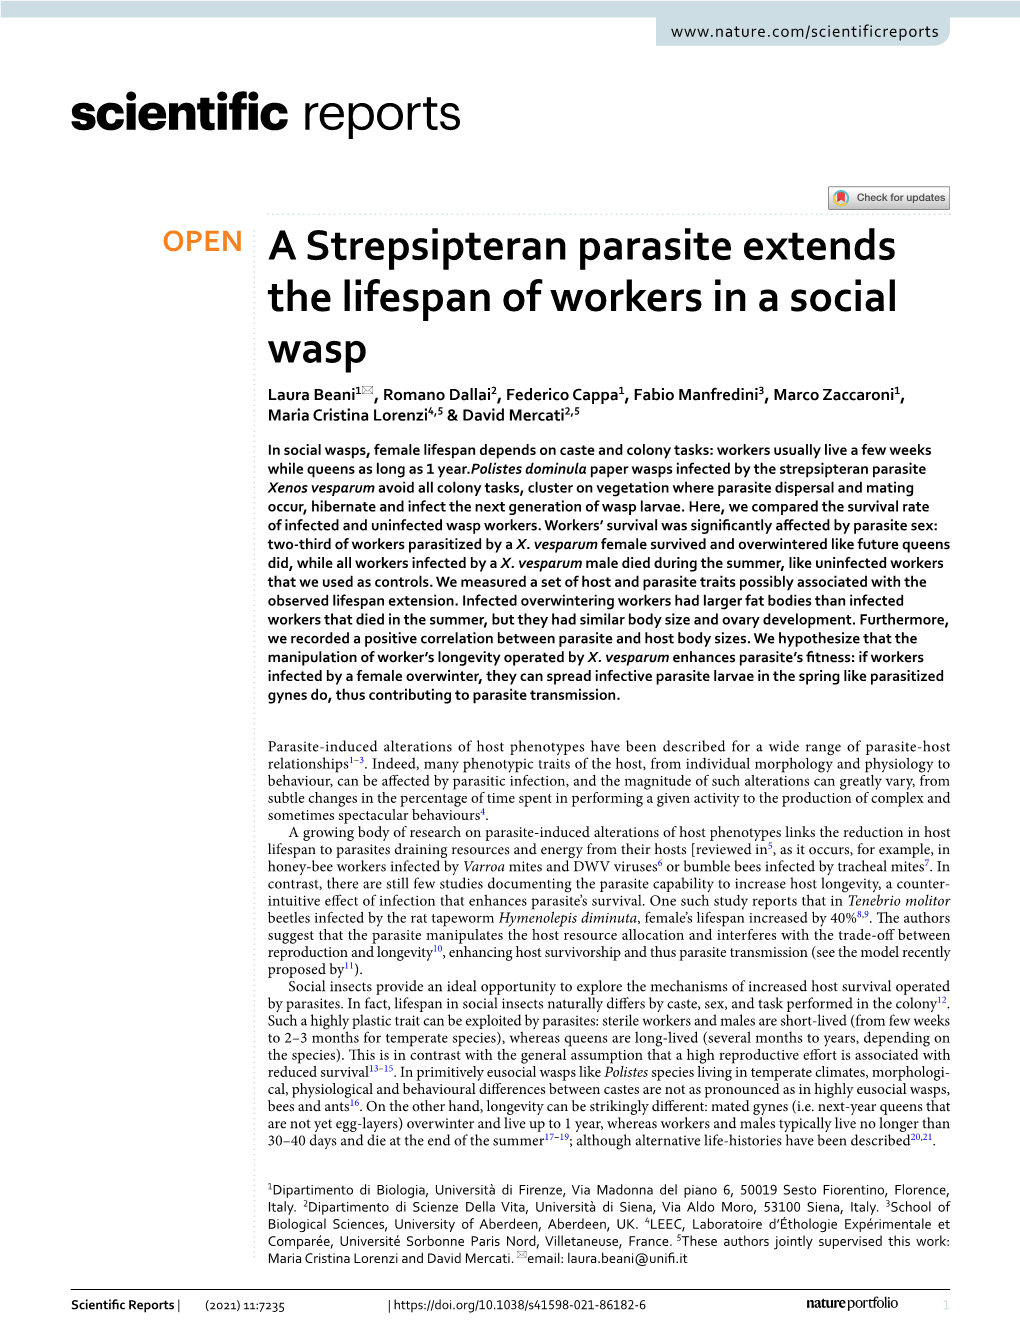 A Strepsipteran Parasite Extends the Lifespan of Workers in a Social Wasp